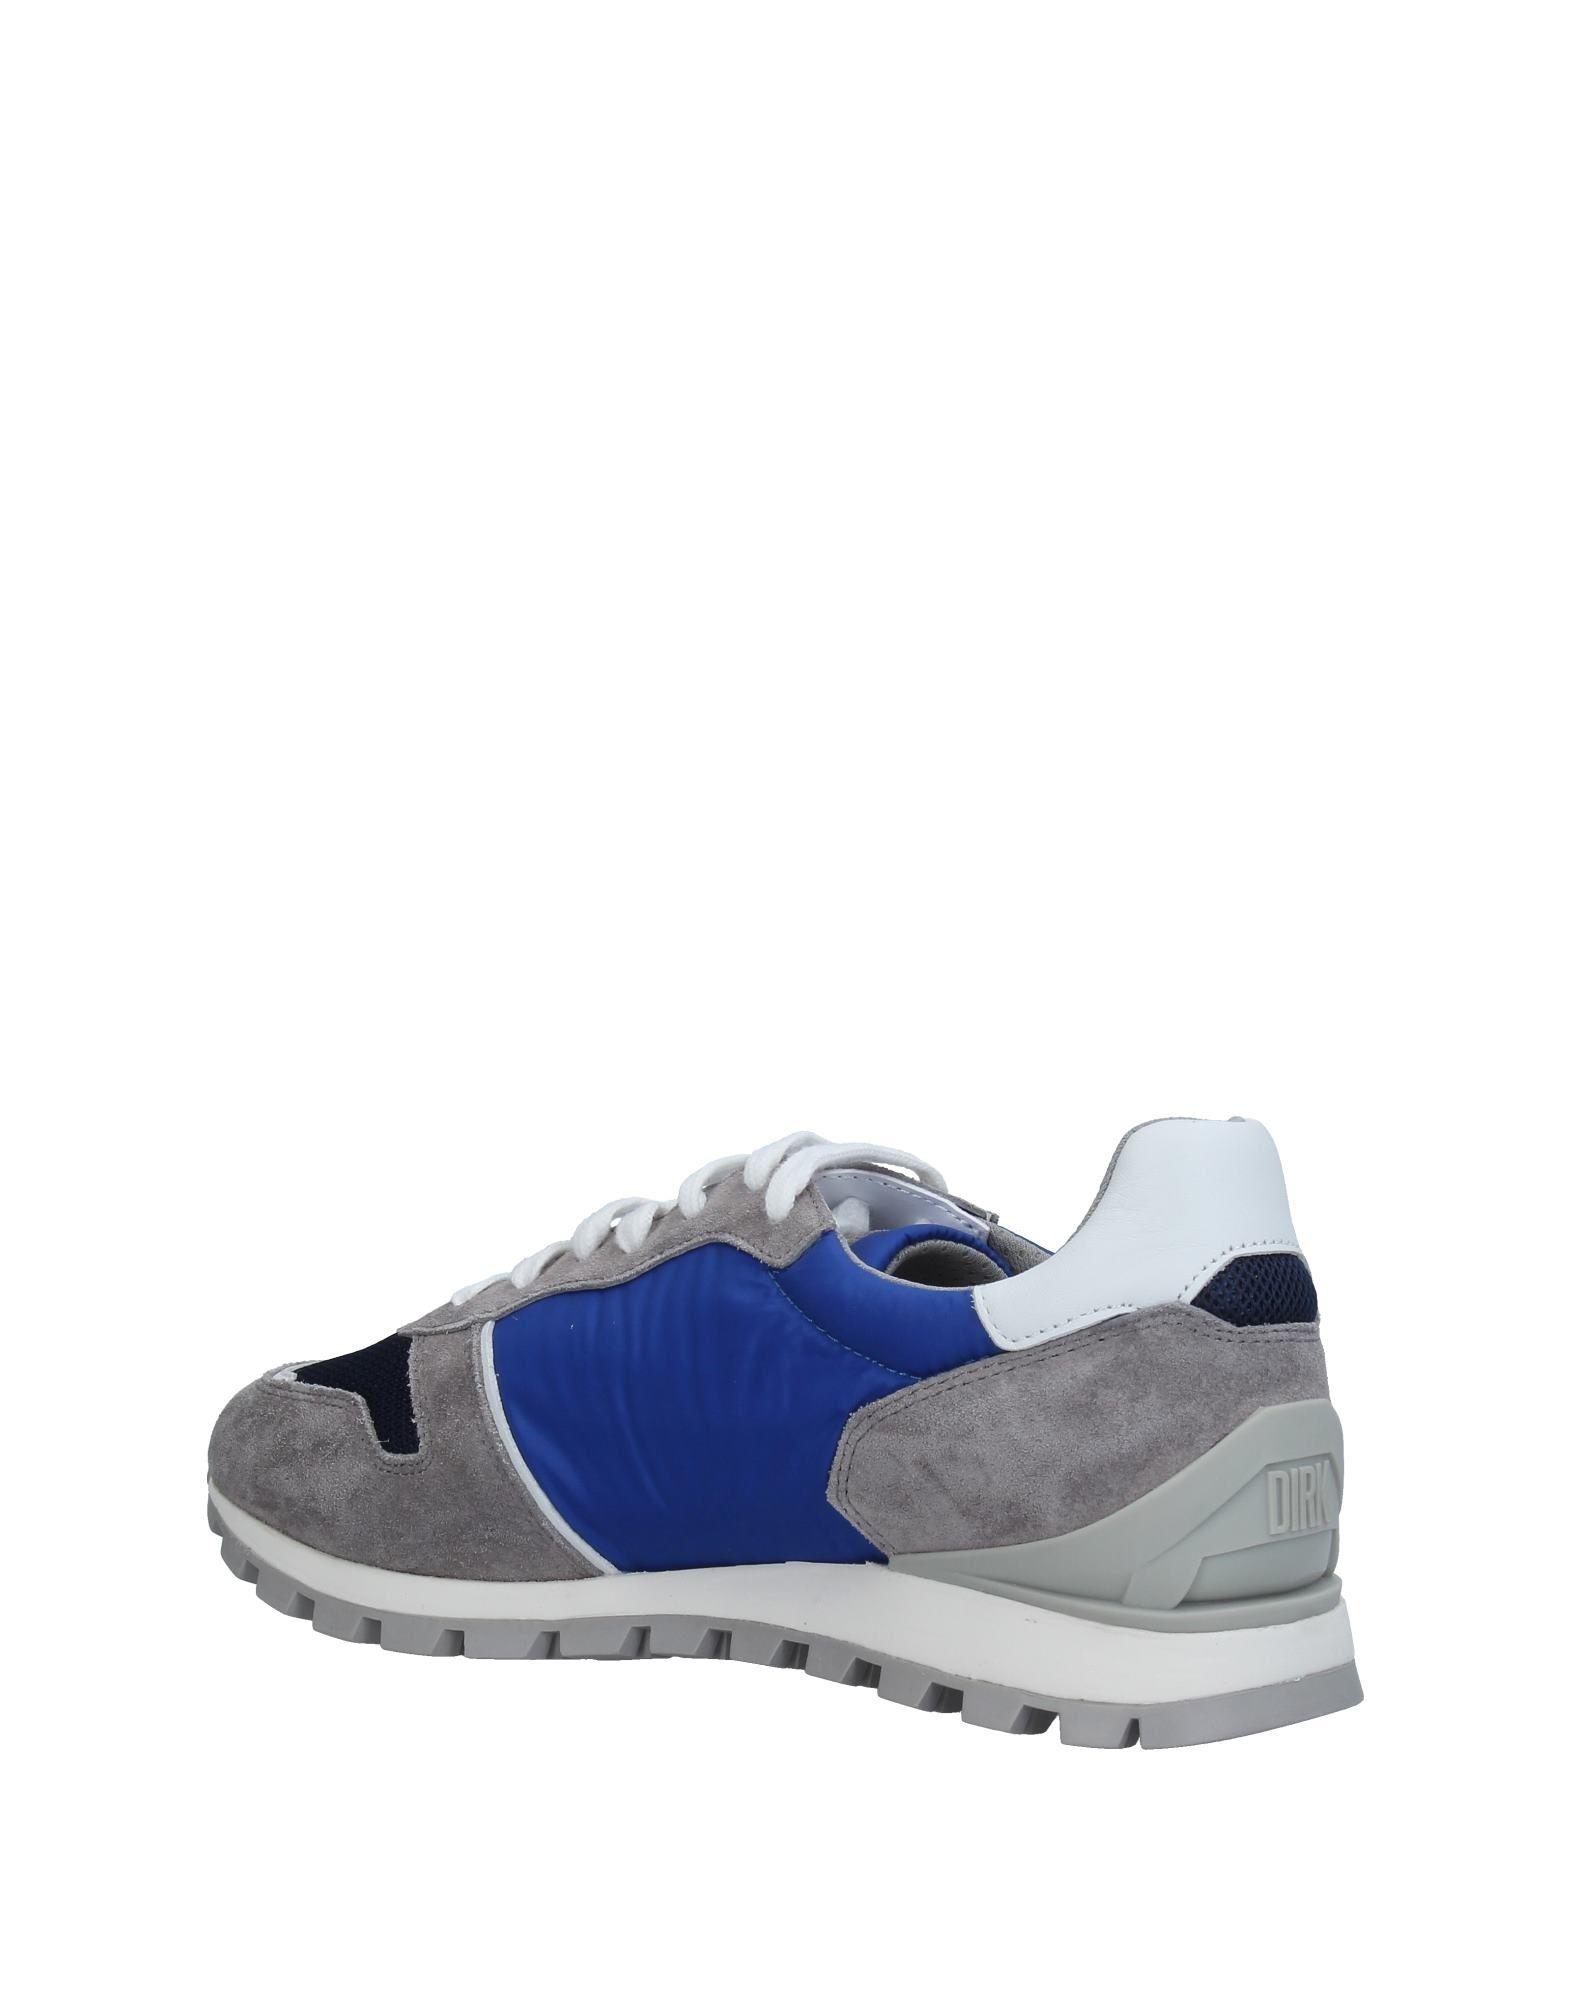 Bikkembergs Leather Low-tops & Sneakers in Light Grey (Gray) for Men - Lyst